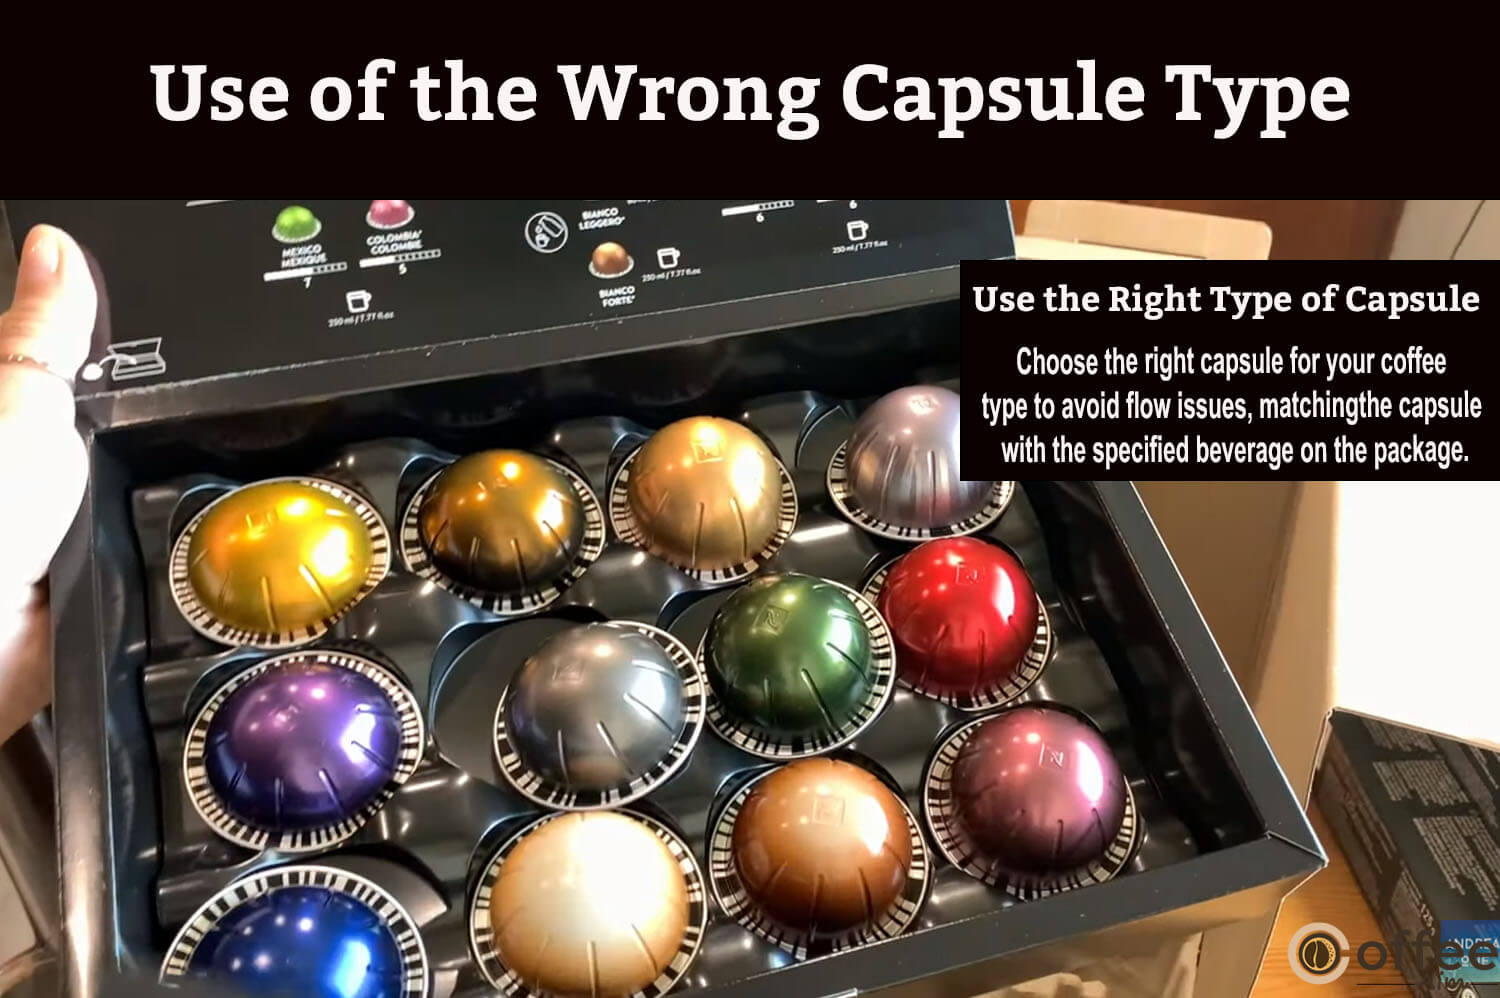 Use the Right Type of Capsule